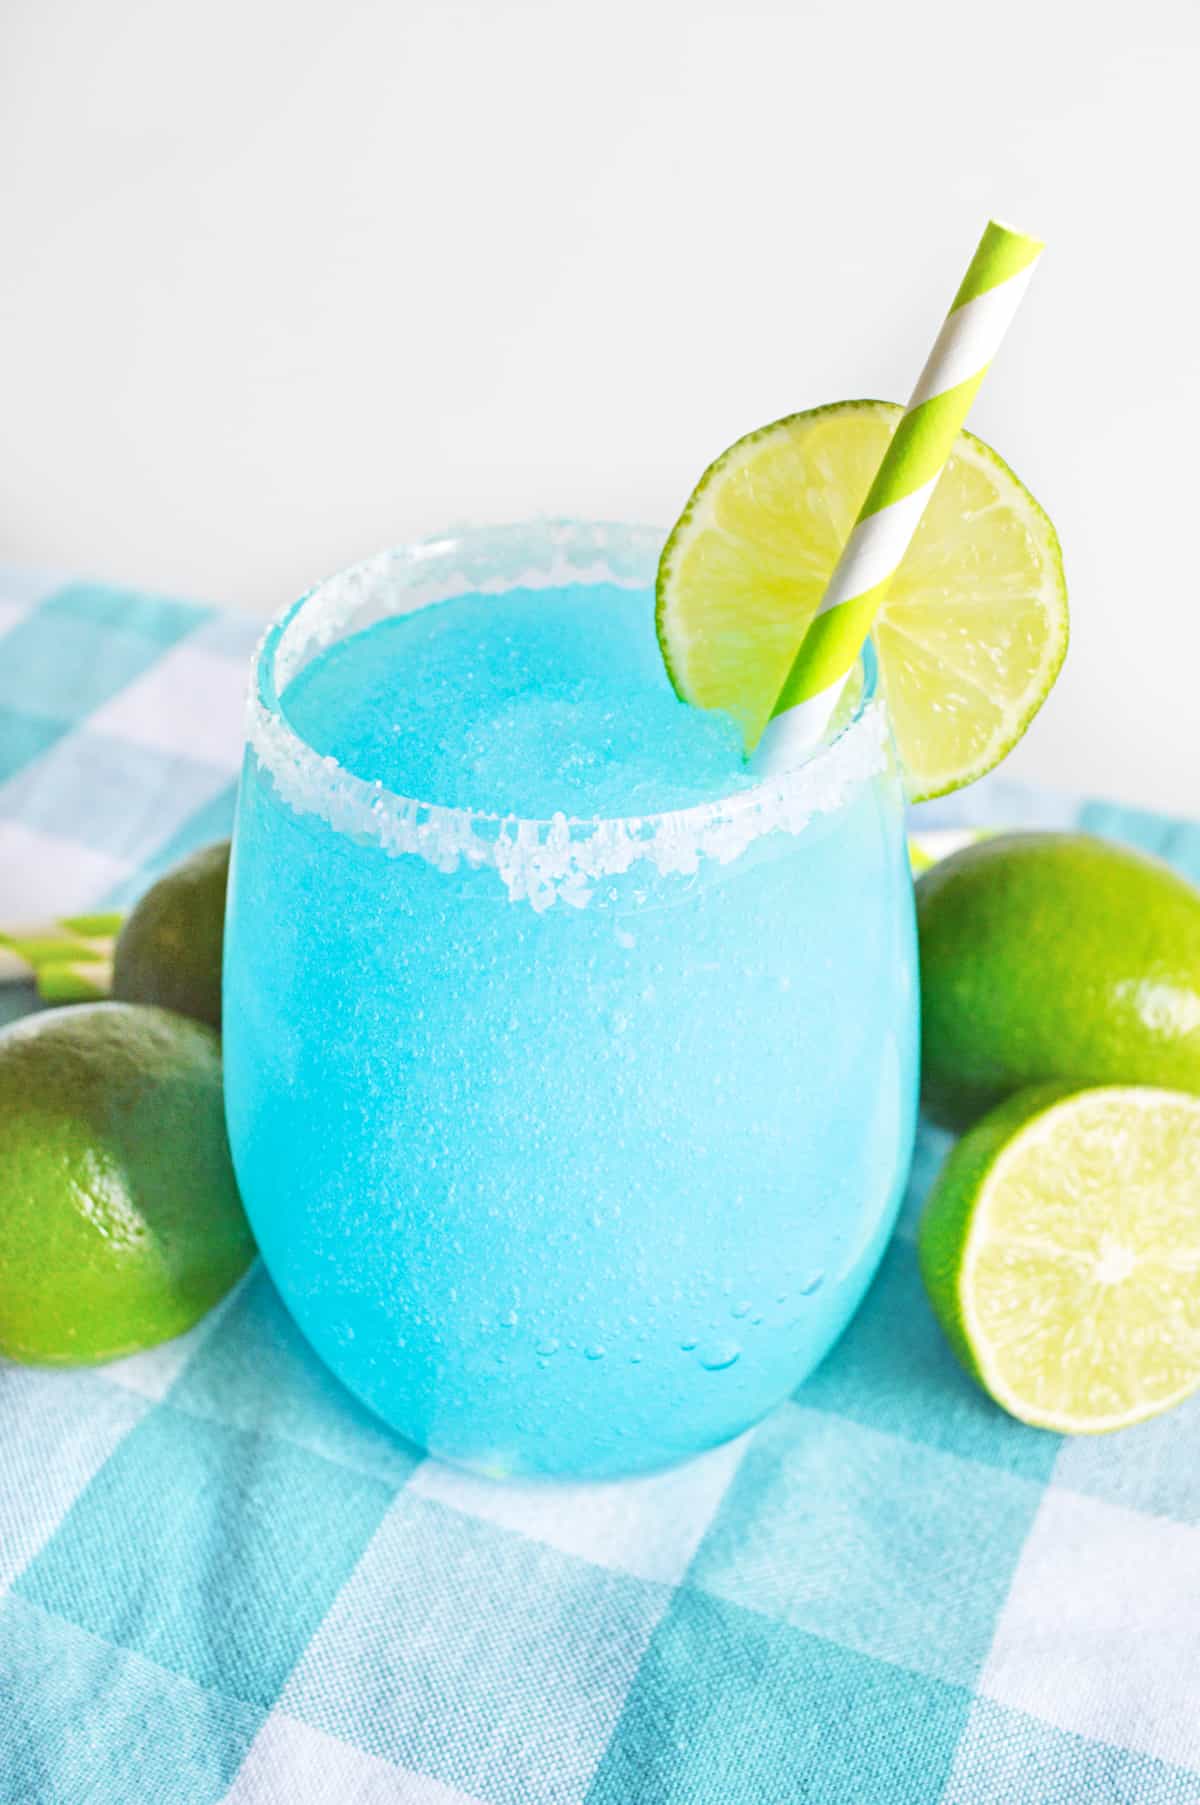 Bright blue frozen margarita garnished with lime and served in a glass rimmed with coarse sugar. Limes are next to glass on blue tablecloth.